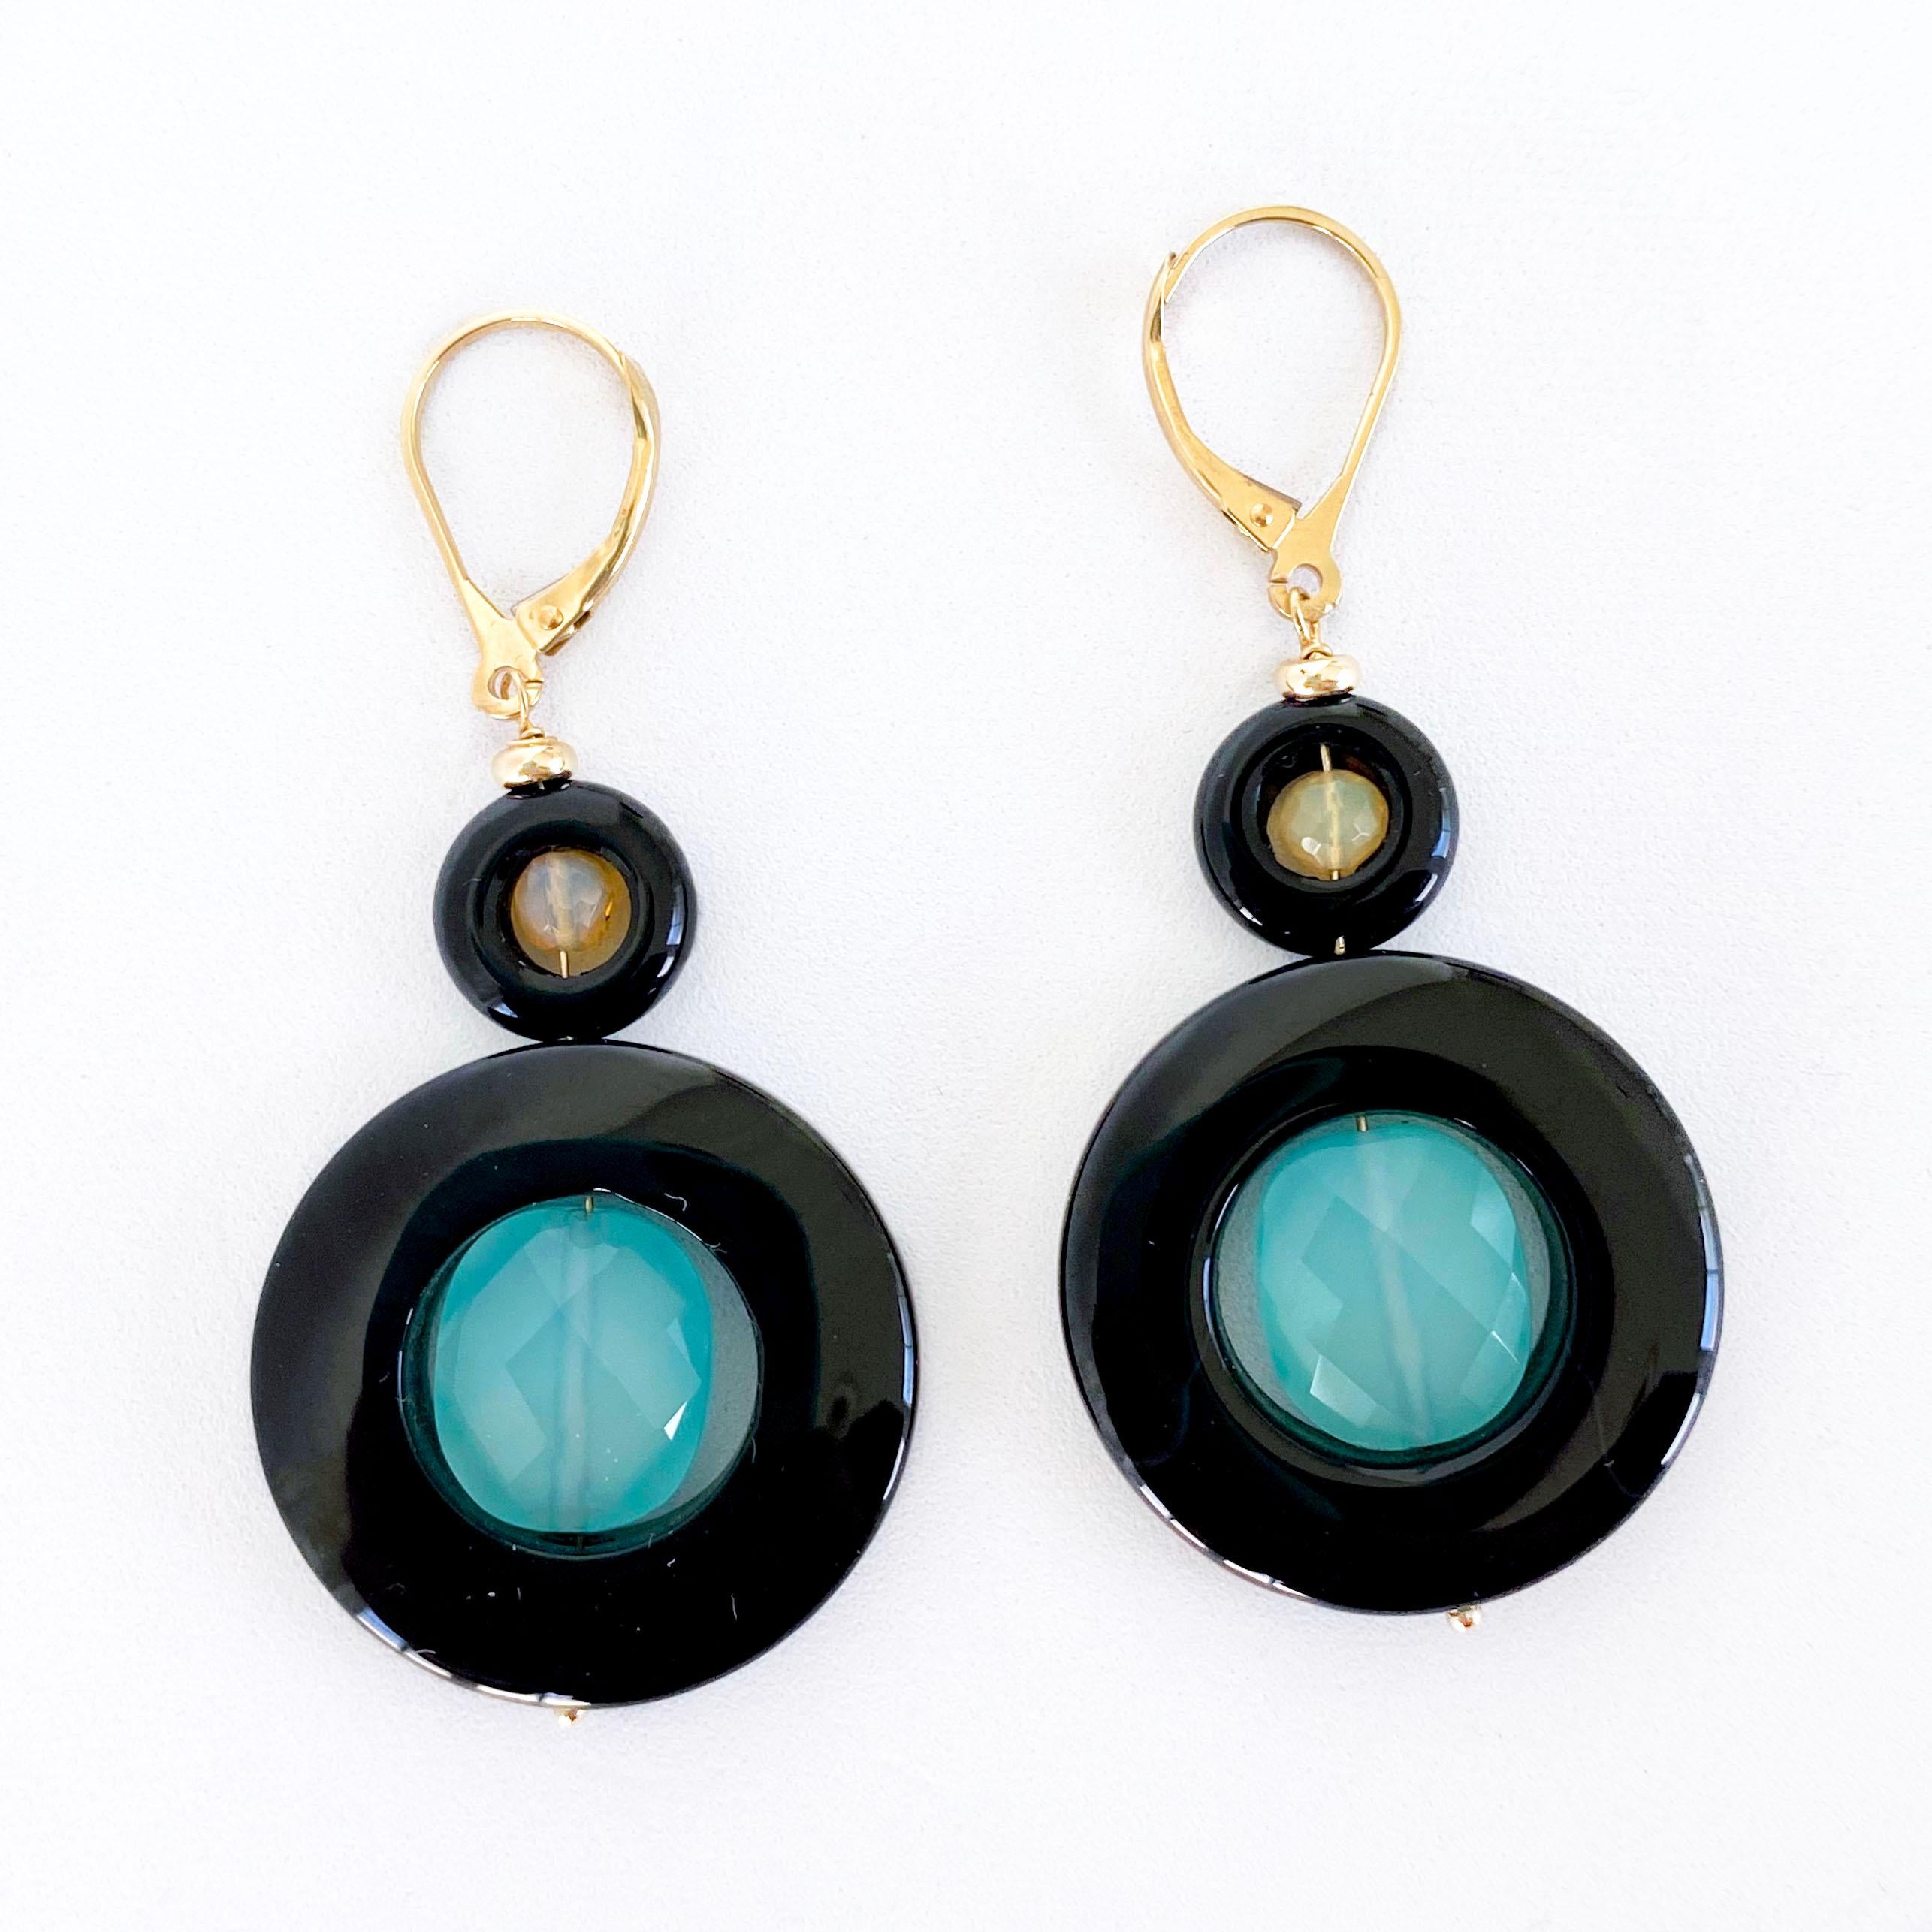 Beautiful and colorful pair of Earrings by Marina J.
This pair is made with Black Onyx 'donuts', Faceted Fire Opal, Faceted Blue Chalcedony and all Solid 14k Yellow Gold wiring, beads & Lever Back Hooks.

The Fire Opal encased within the Black Onyx